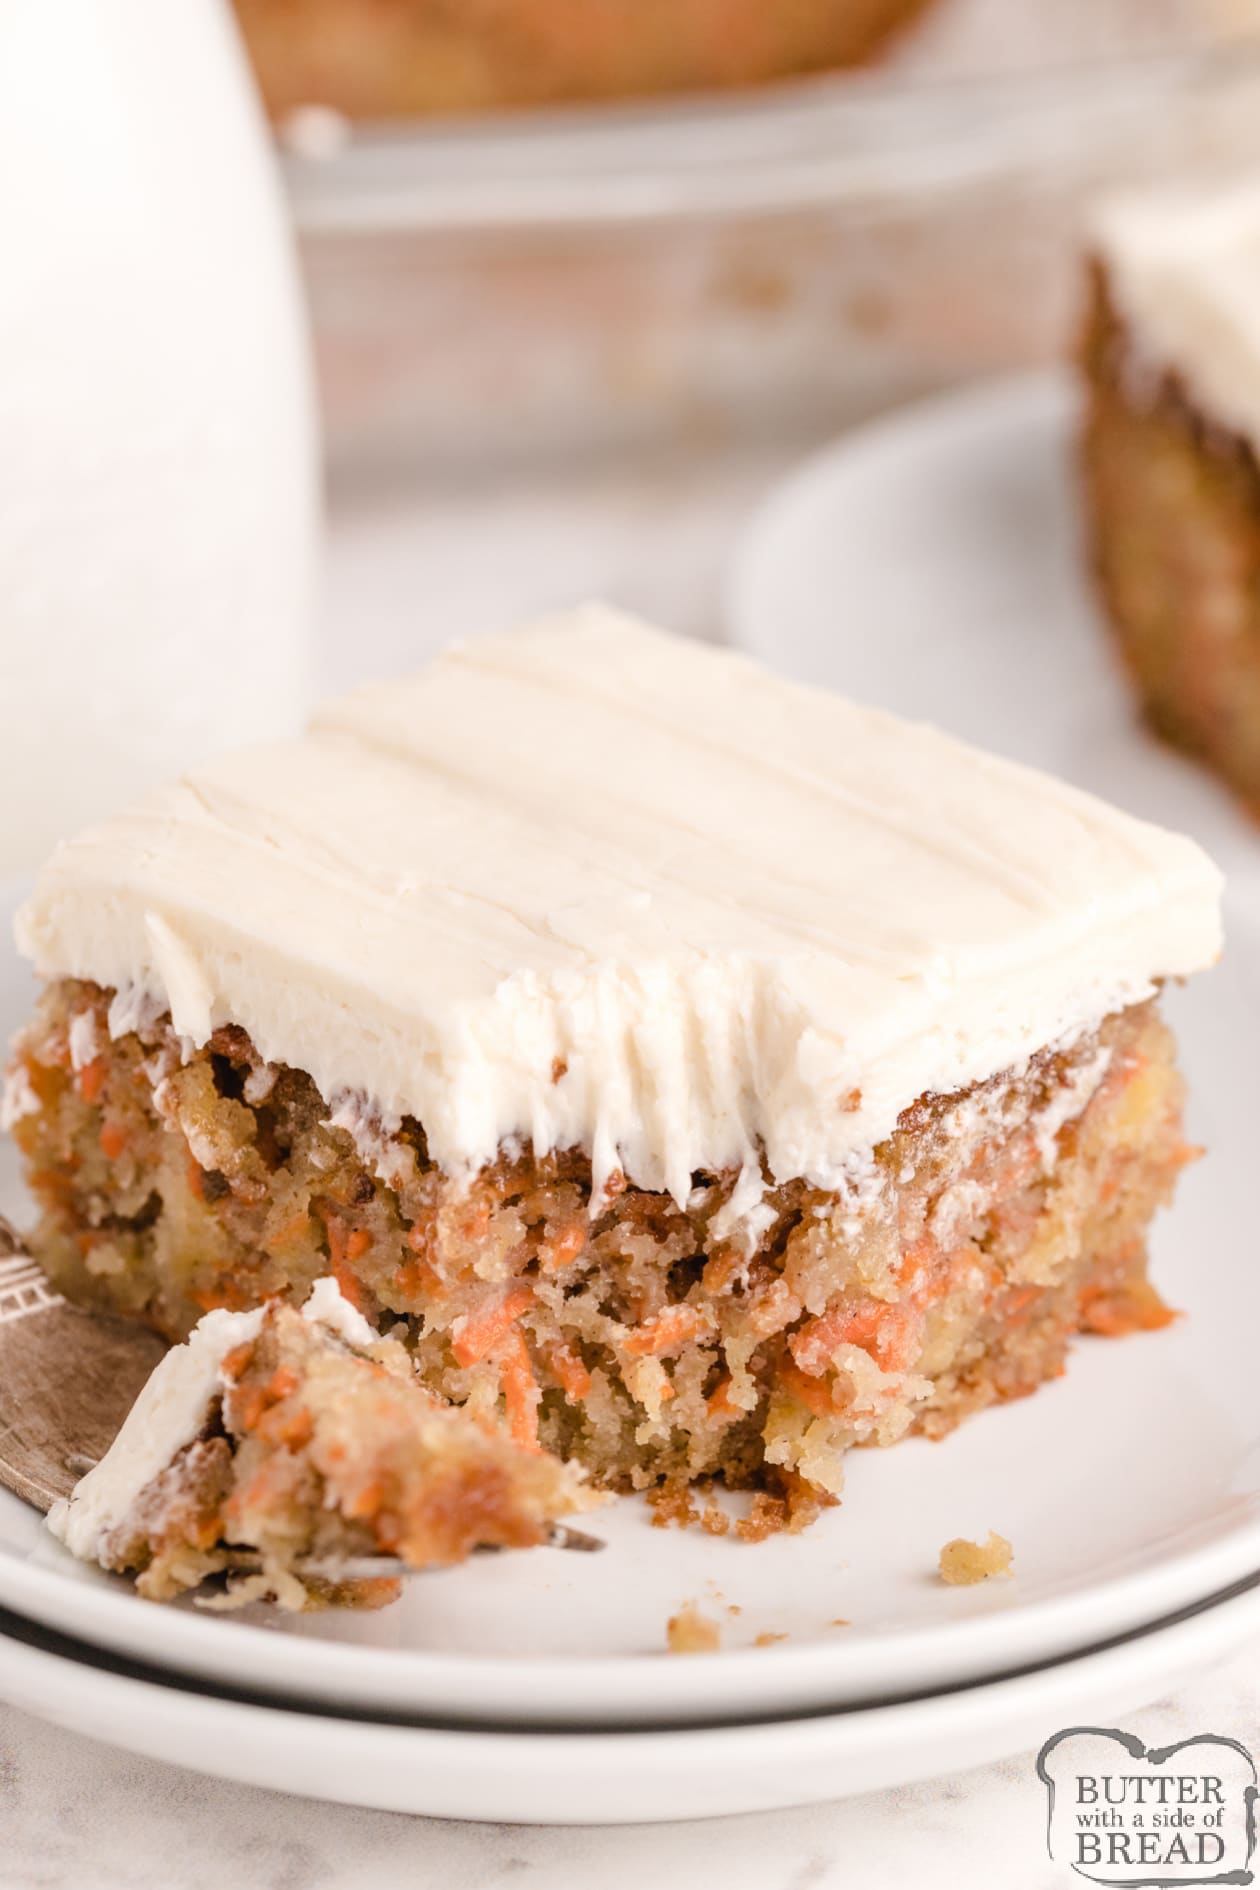 est Carrot Cake recipe that is moist, delicious and made with crushed pineapple and shredded carrots. The homemade cream cheese frosting pairs perfectly with this carrot cake recipe.